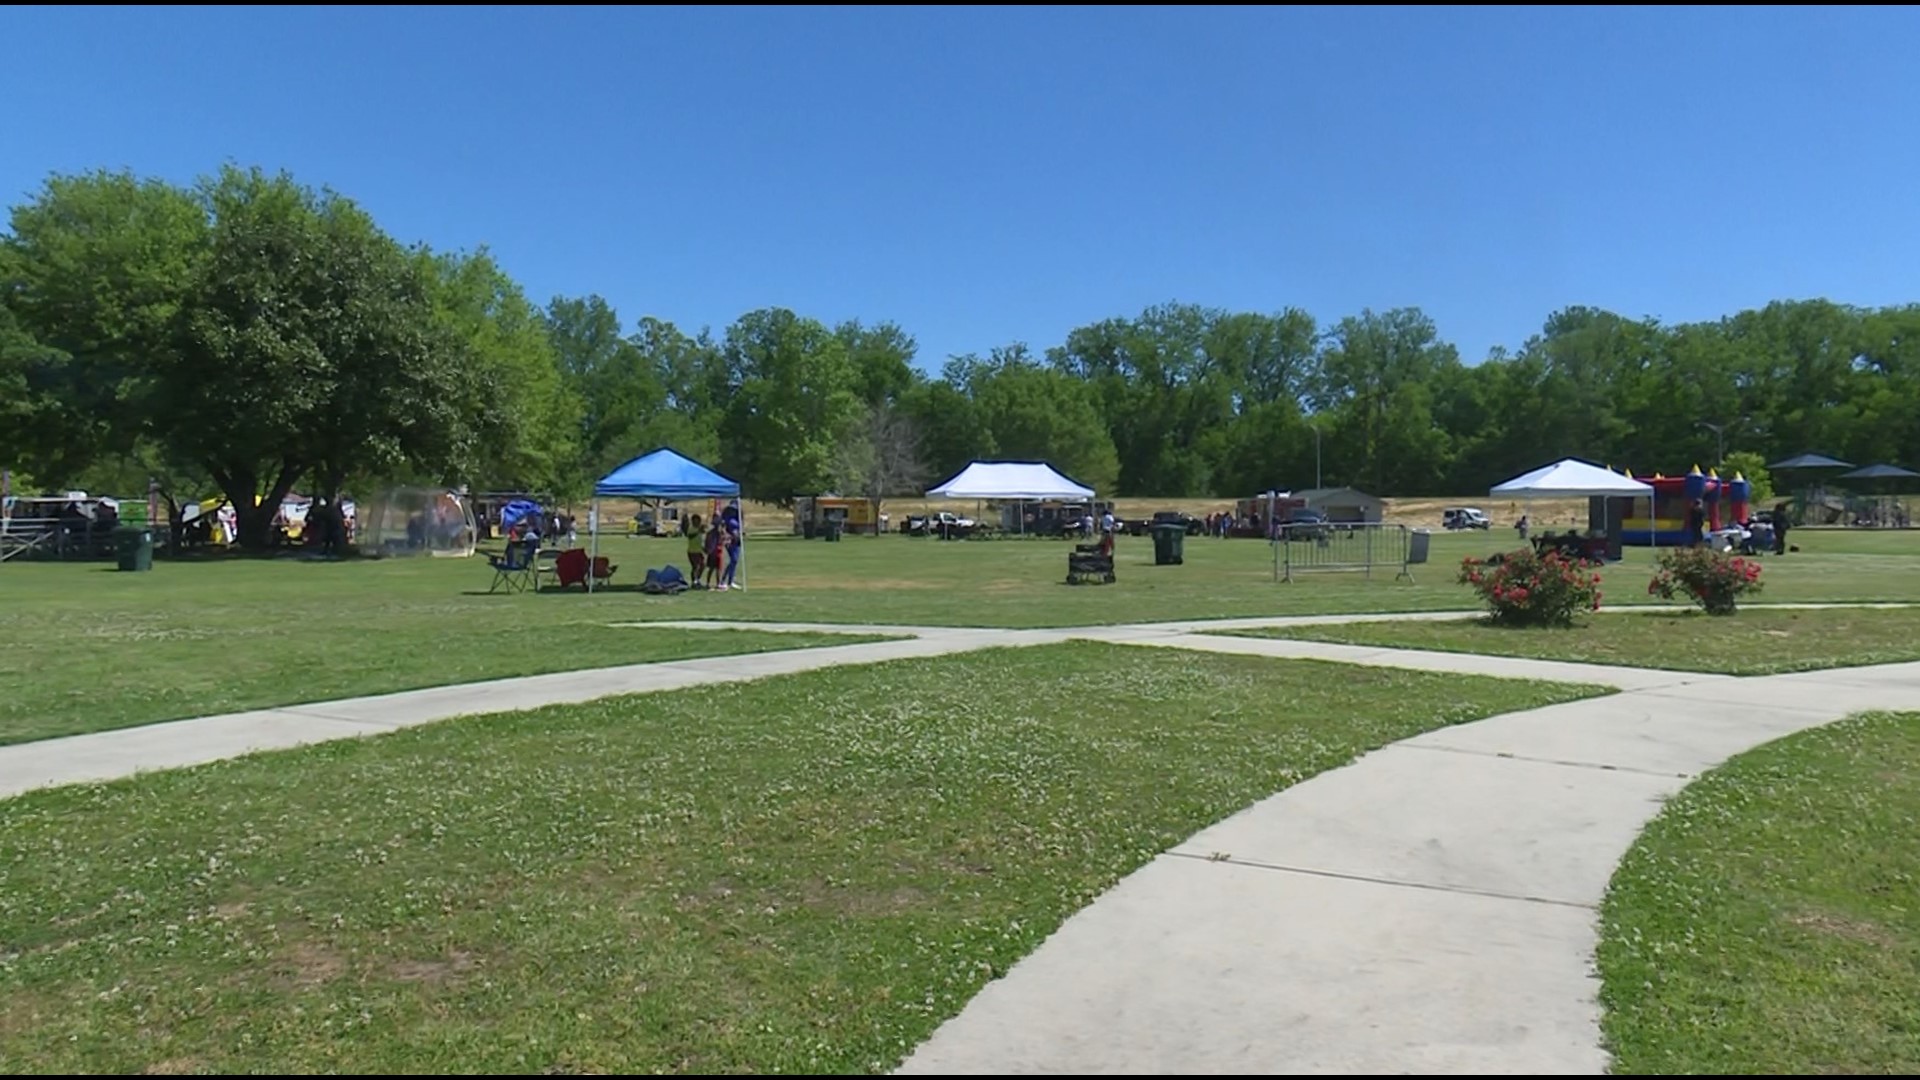 Families gathered in Carolyn Crayton park for food trucks, fun, and live music.